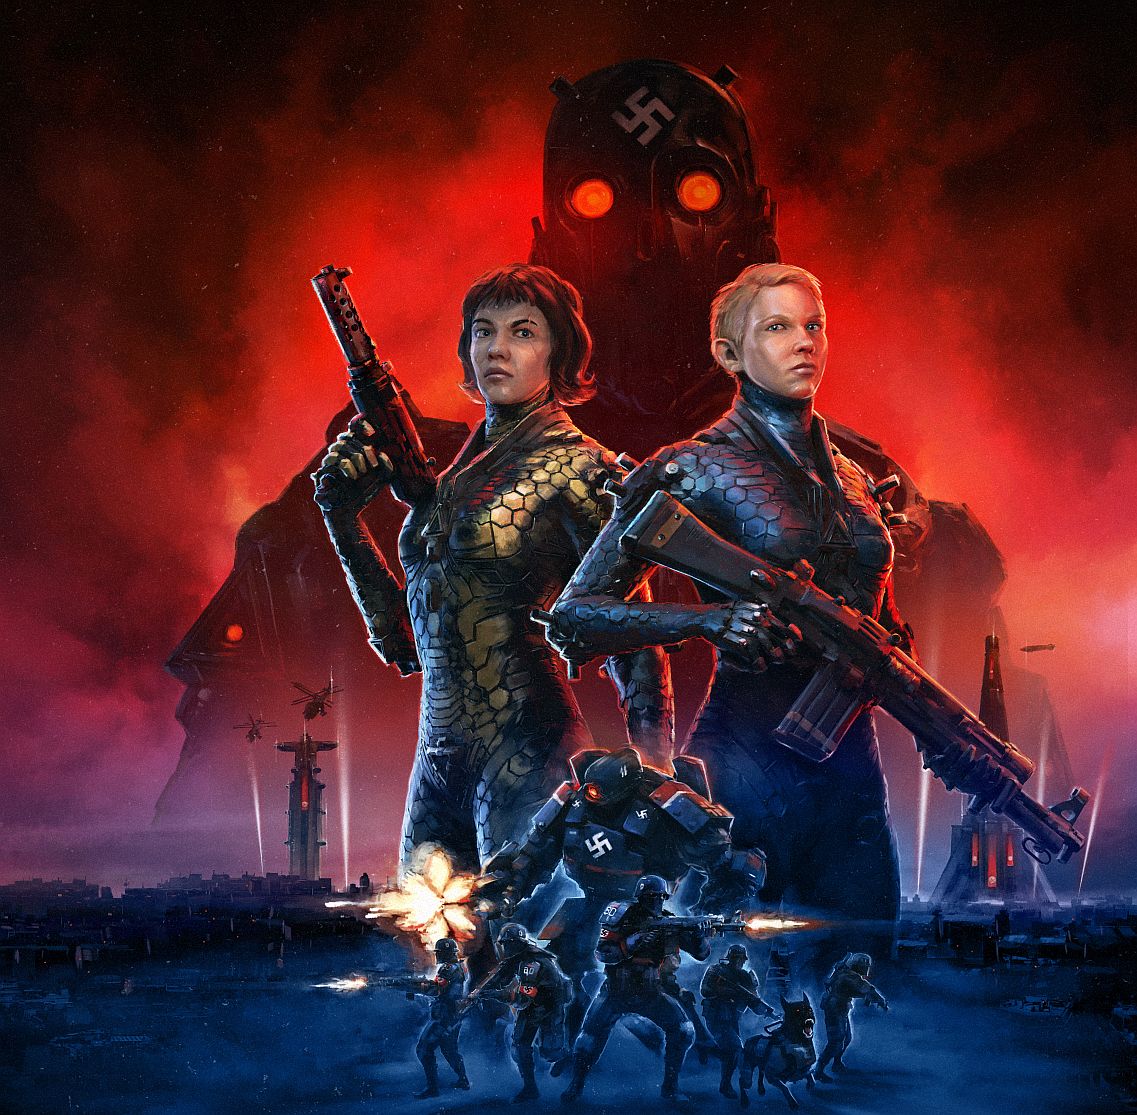 Image for Wolfenstein: Youngblood hands-on - MachineGames and Arkane team up for co-op Nazi-shanking action